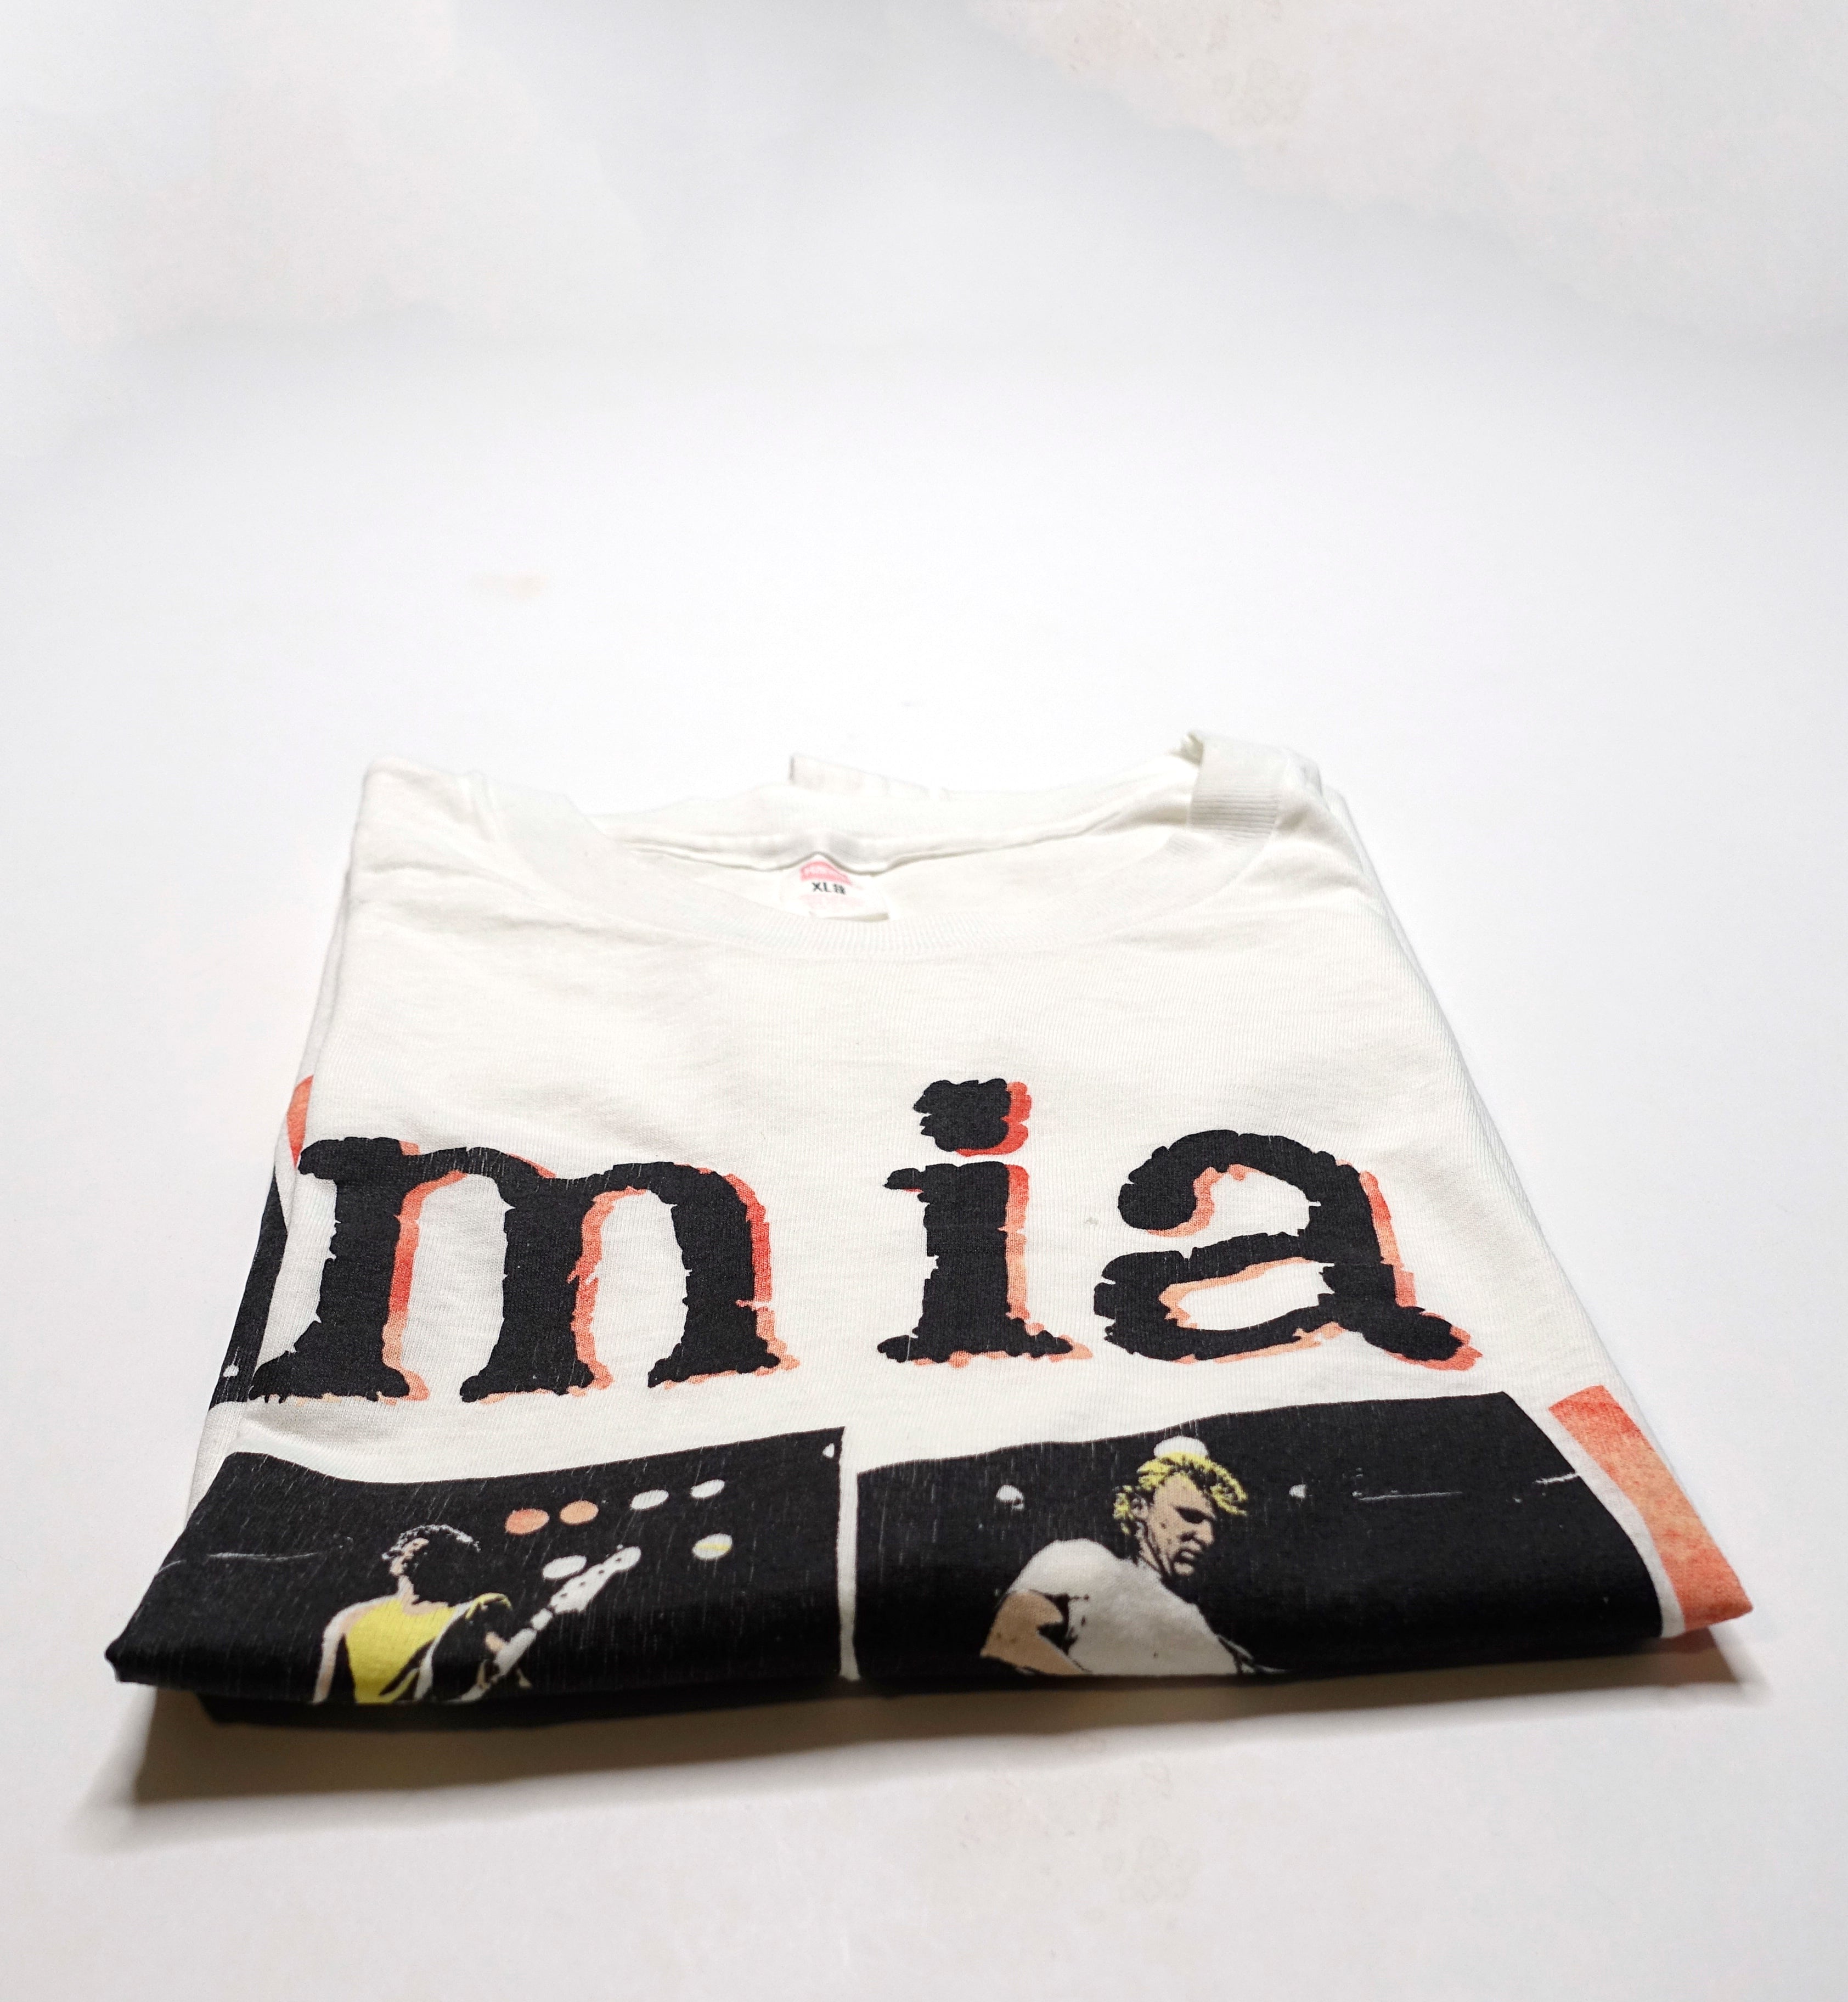 M.I.A. - After The Fact 1987 Tour Shirt Size XL (but really a Large)